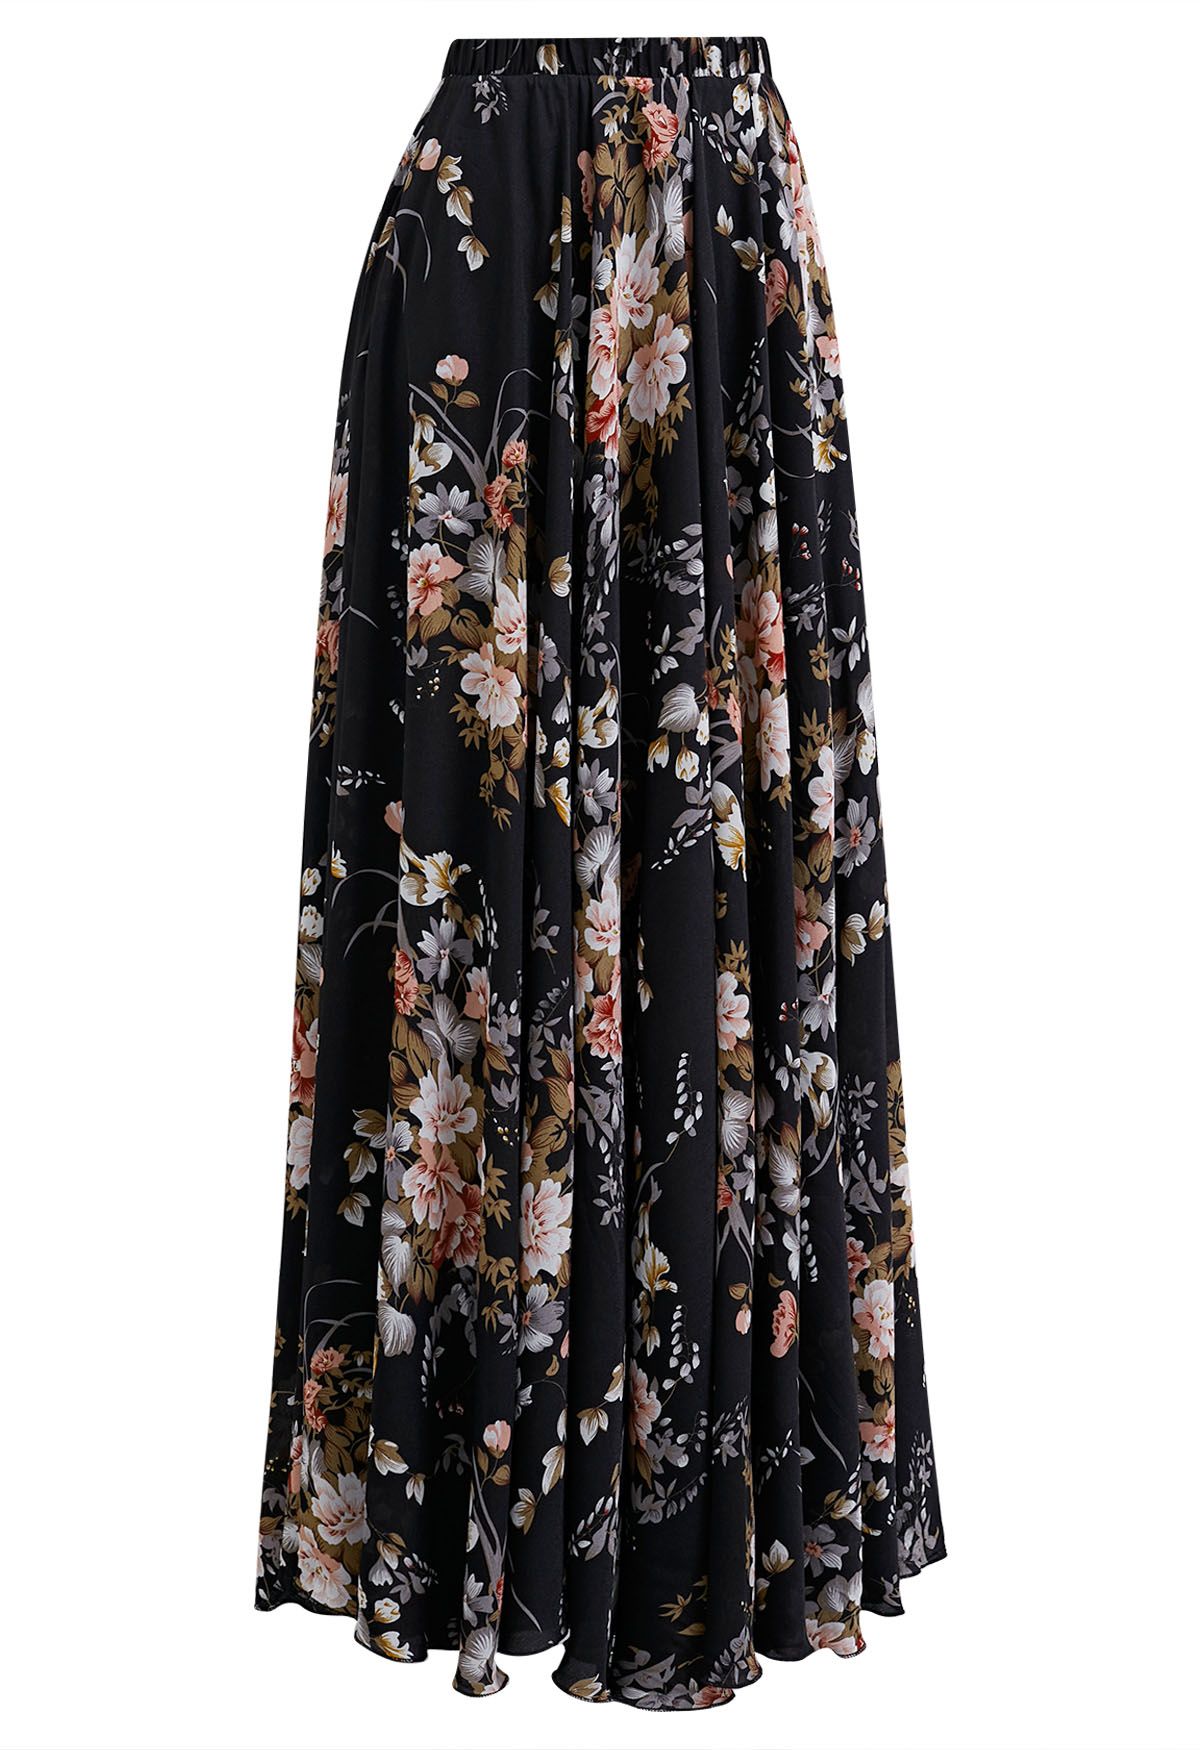 Spellbinding Bouquet Chiffon Maxi Skirt in Black - Retro, Indie and ...